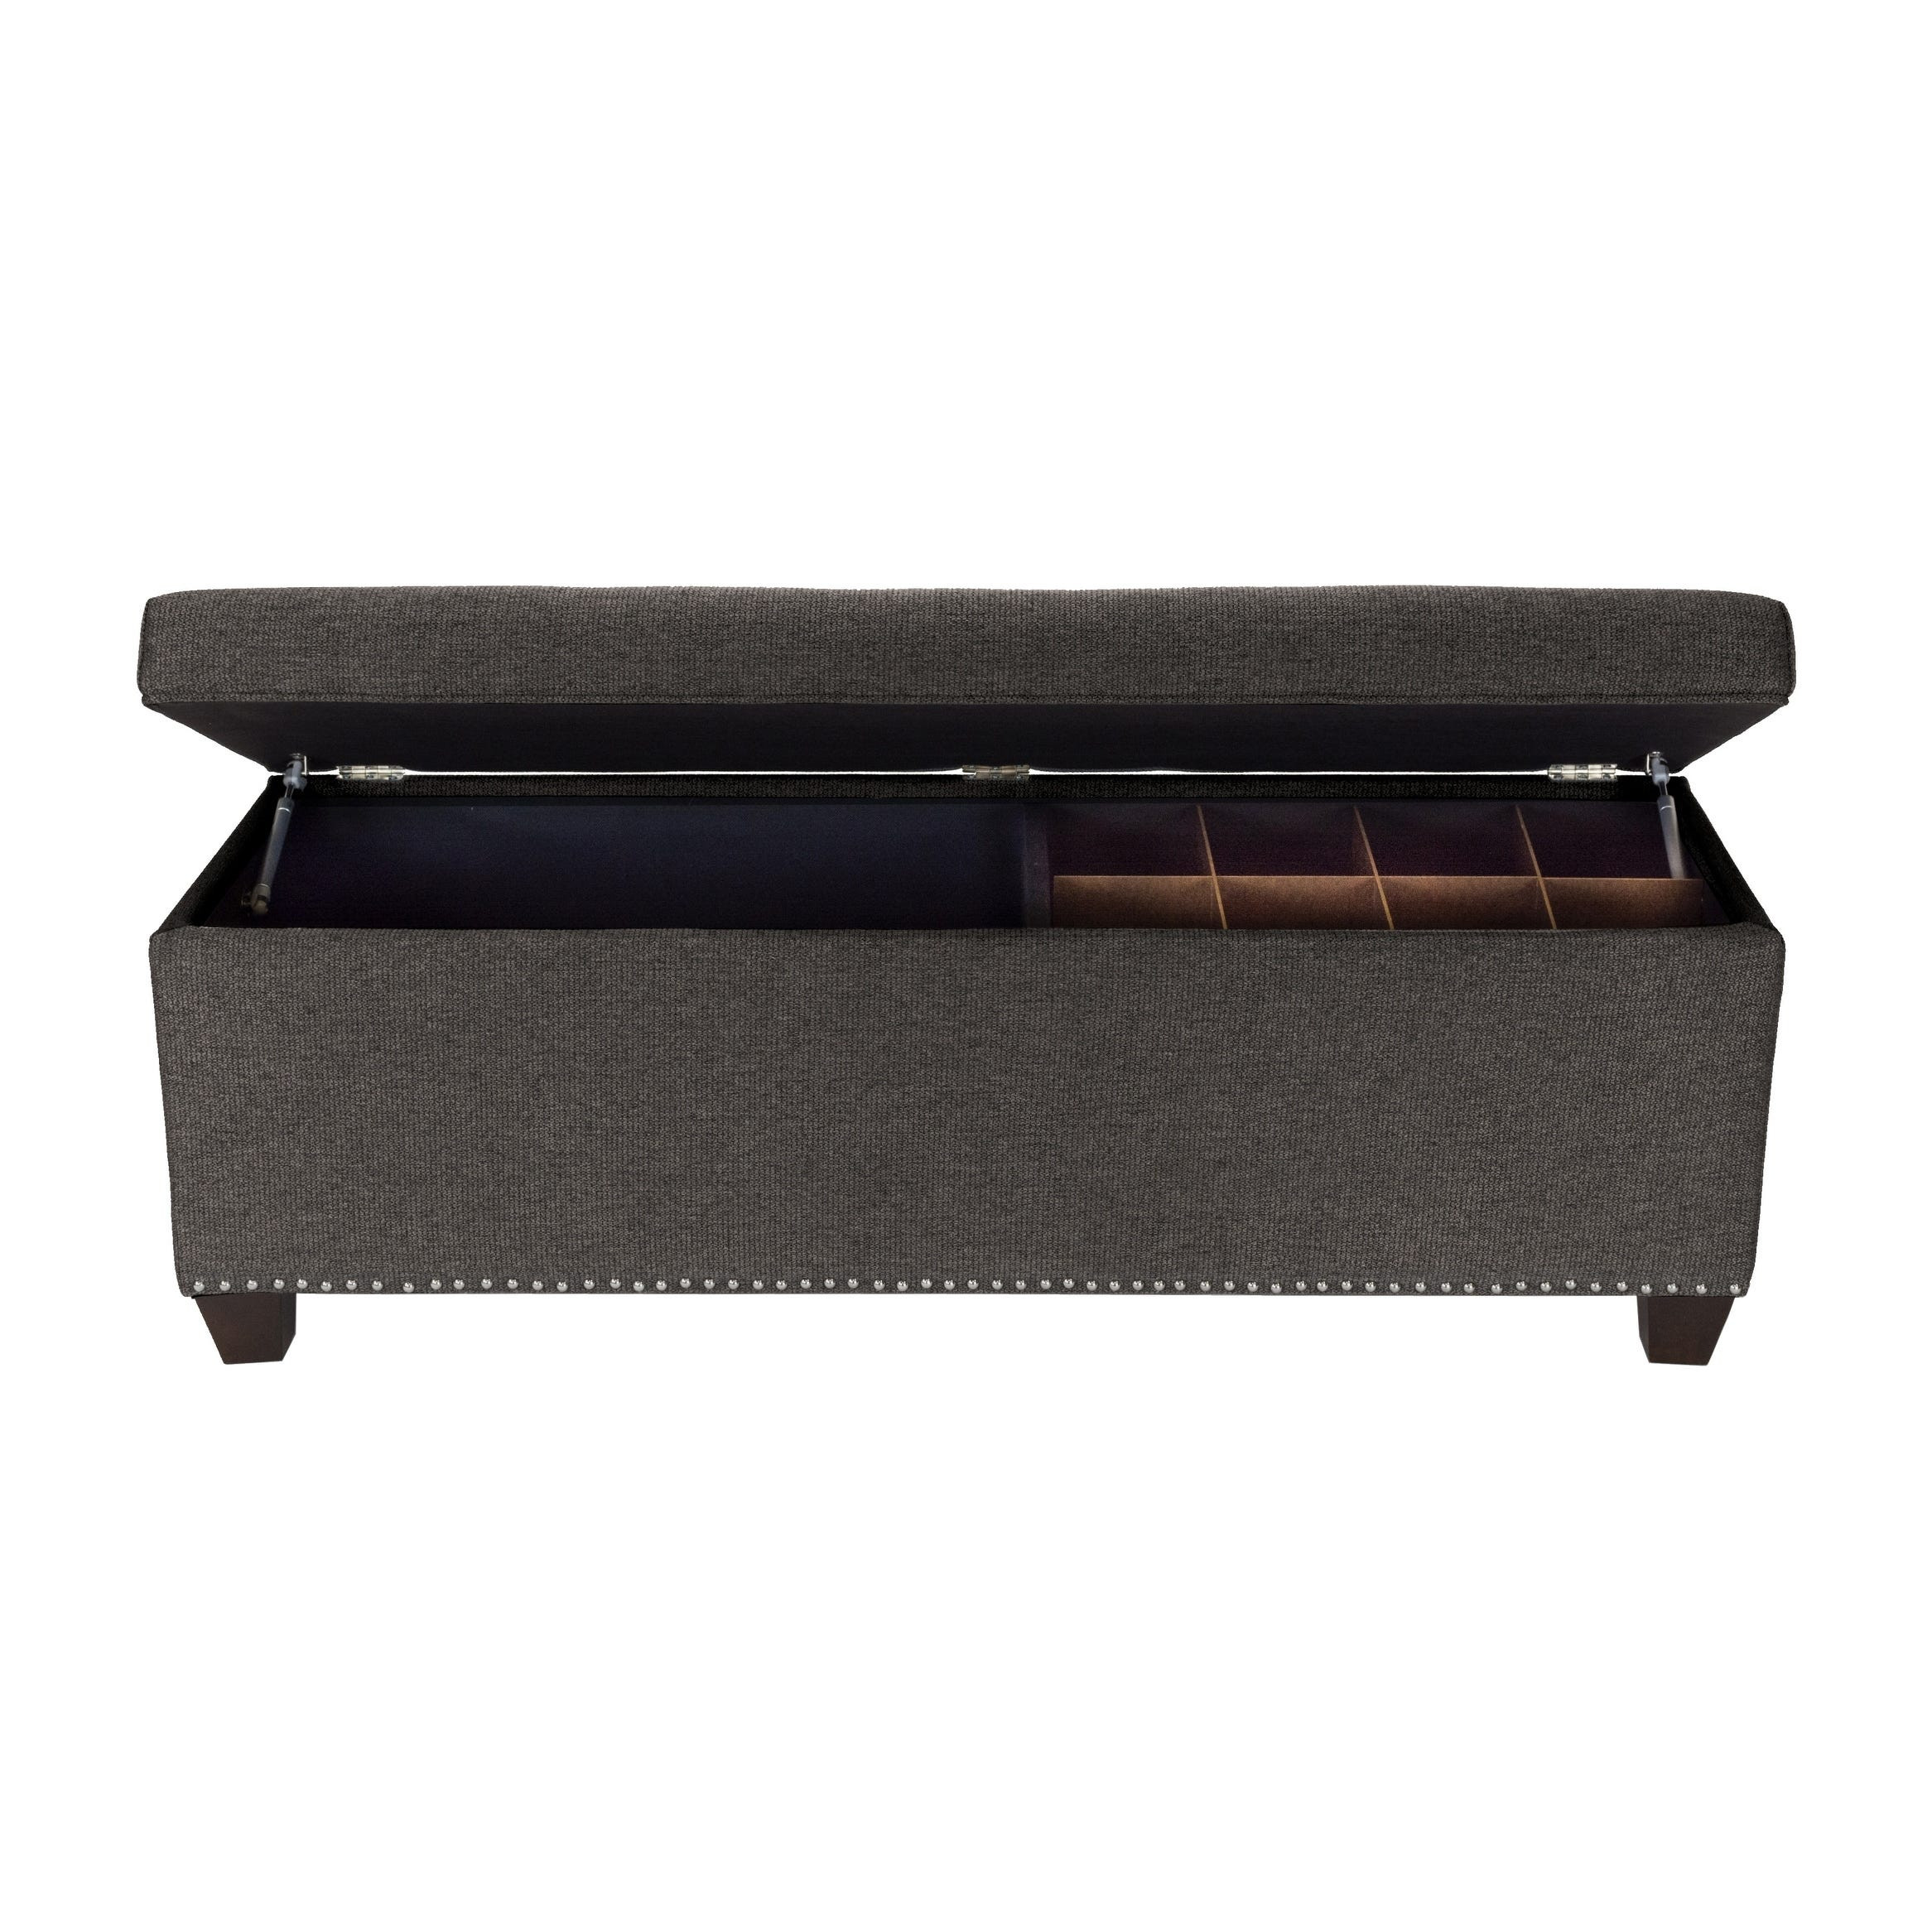 Secret Shoe Storage Bench
 Buy Benches & Settees line at Overstock